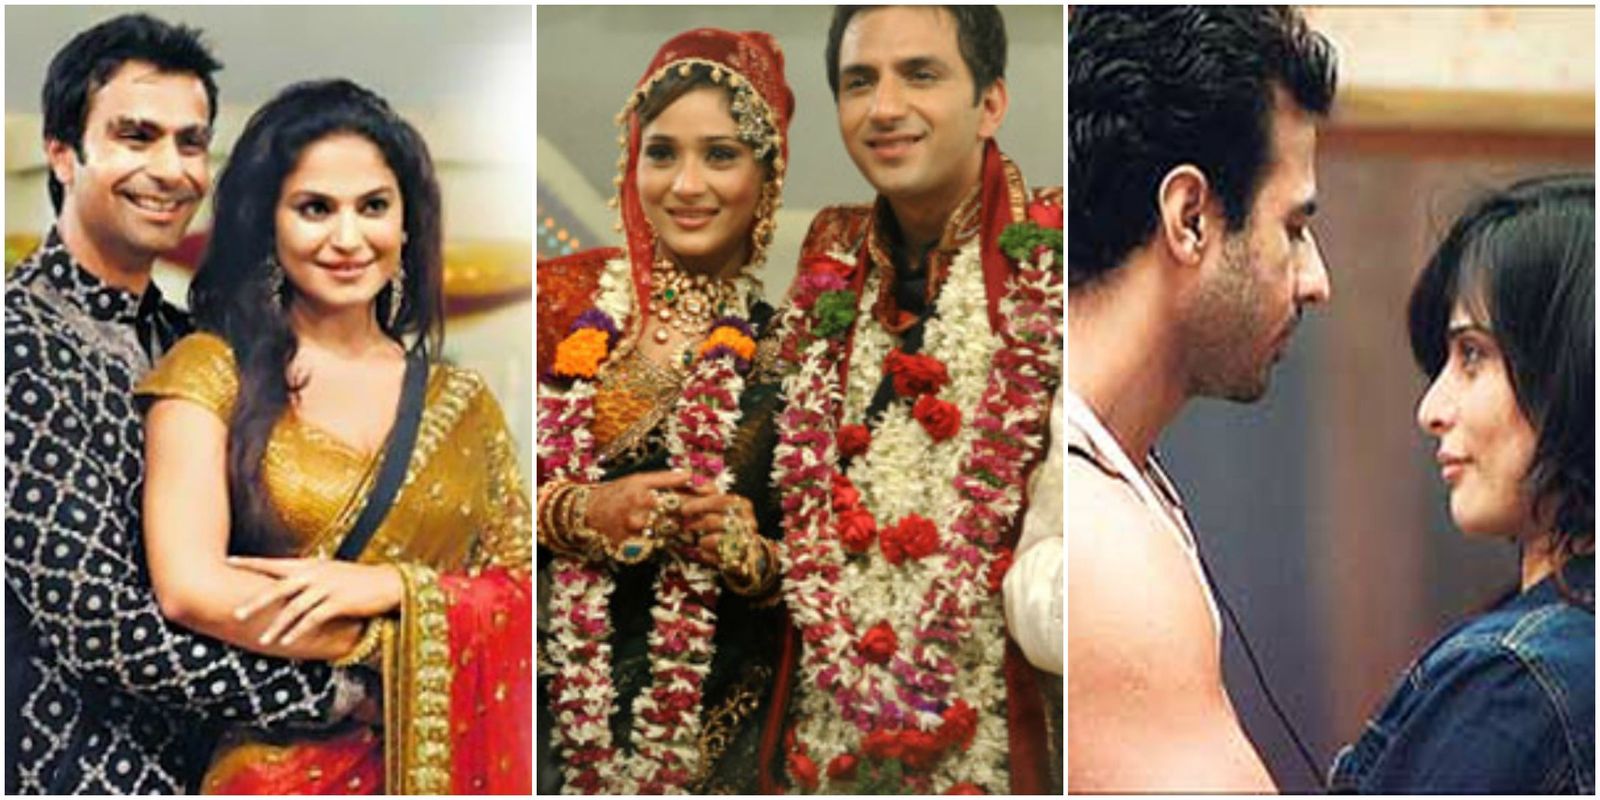 12 Couples Who Fell In Love On The Sets Of Bigg Boss!